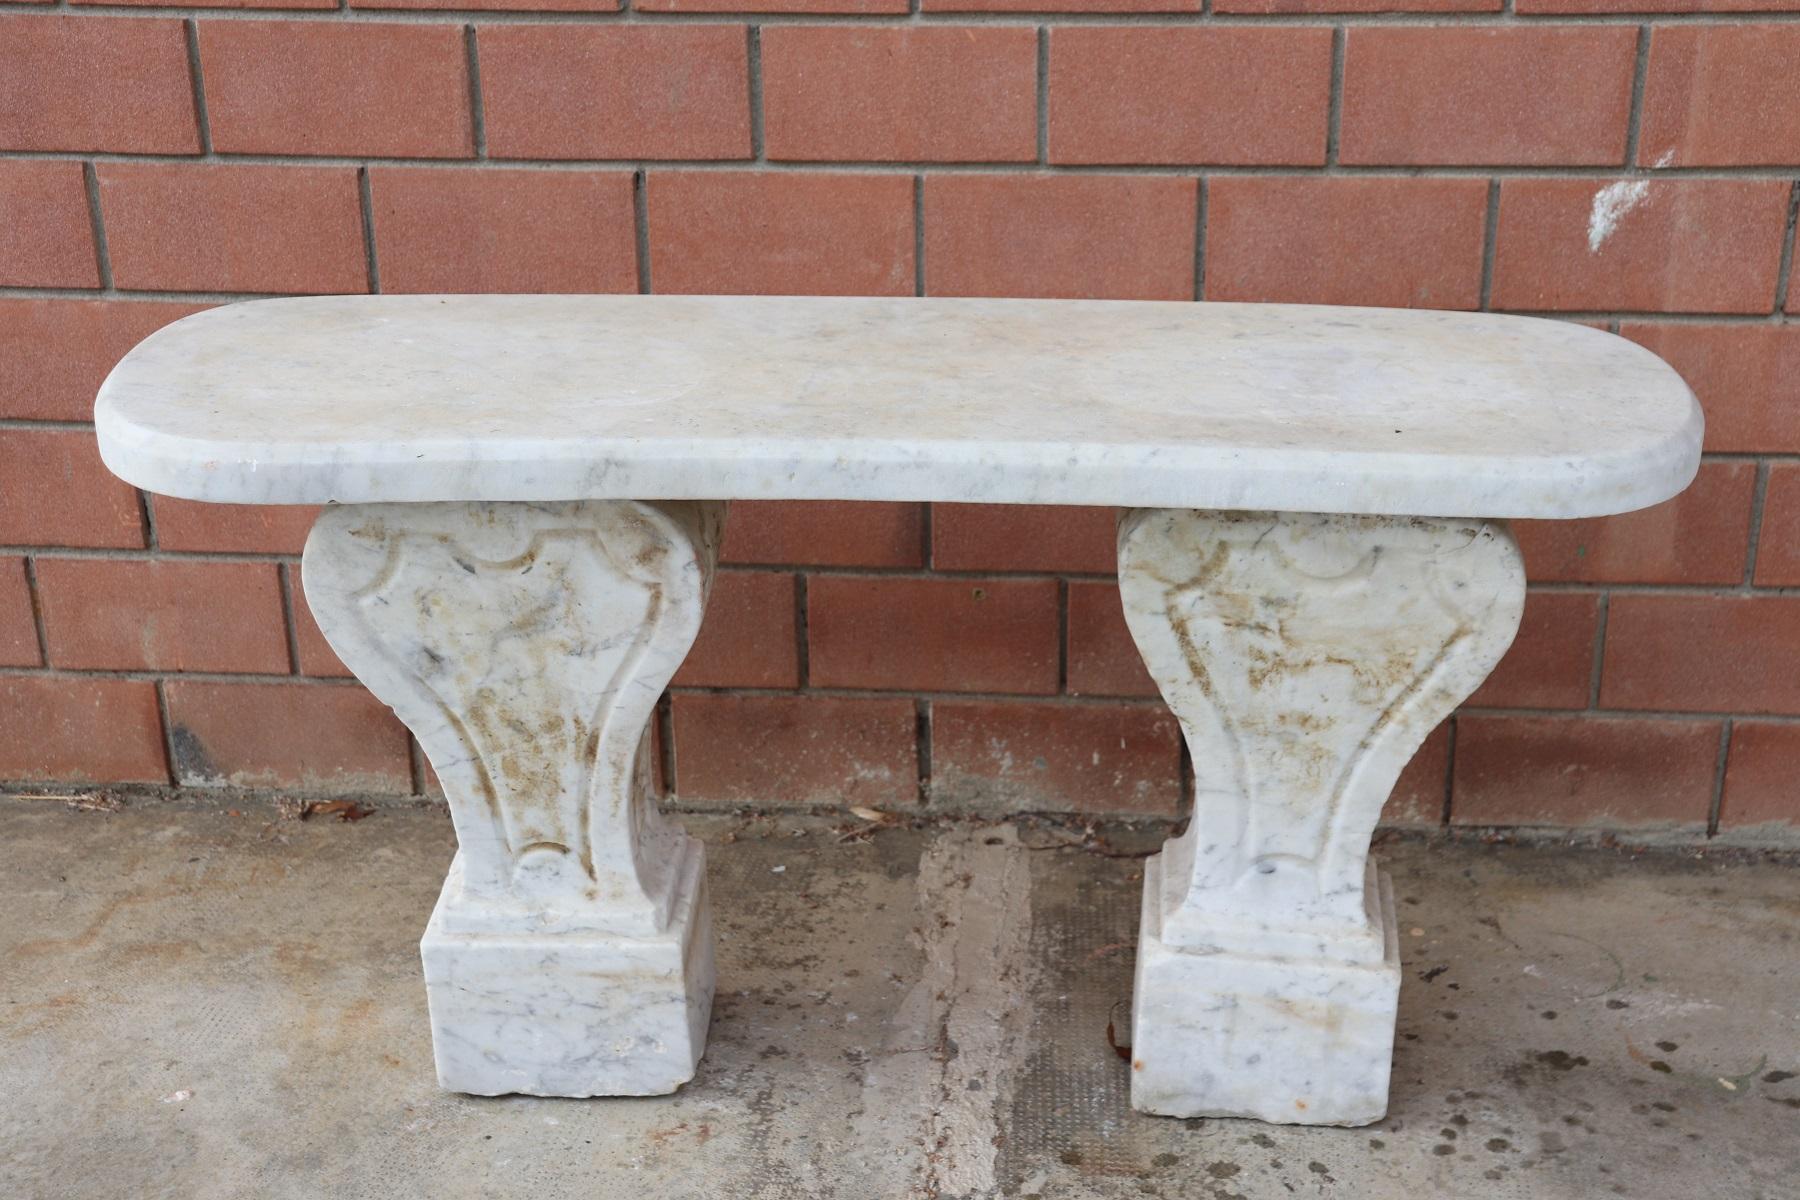 Beautiful refined garden ad outdoor bench. Beautiful and majestic in italian white Carrara marble. The bench has a refined classic decoration. The marble shows signs of the passage of time with some stains. This bench is perfect for embellishing an